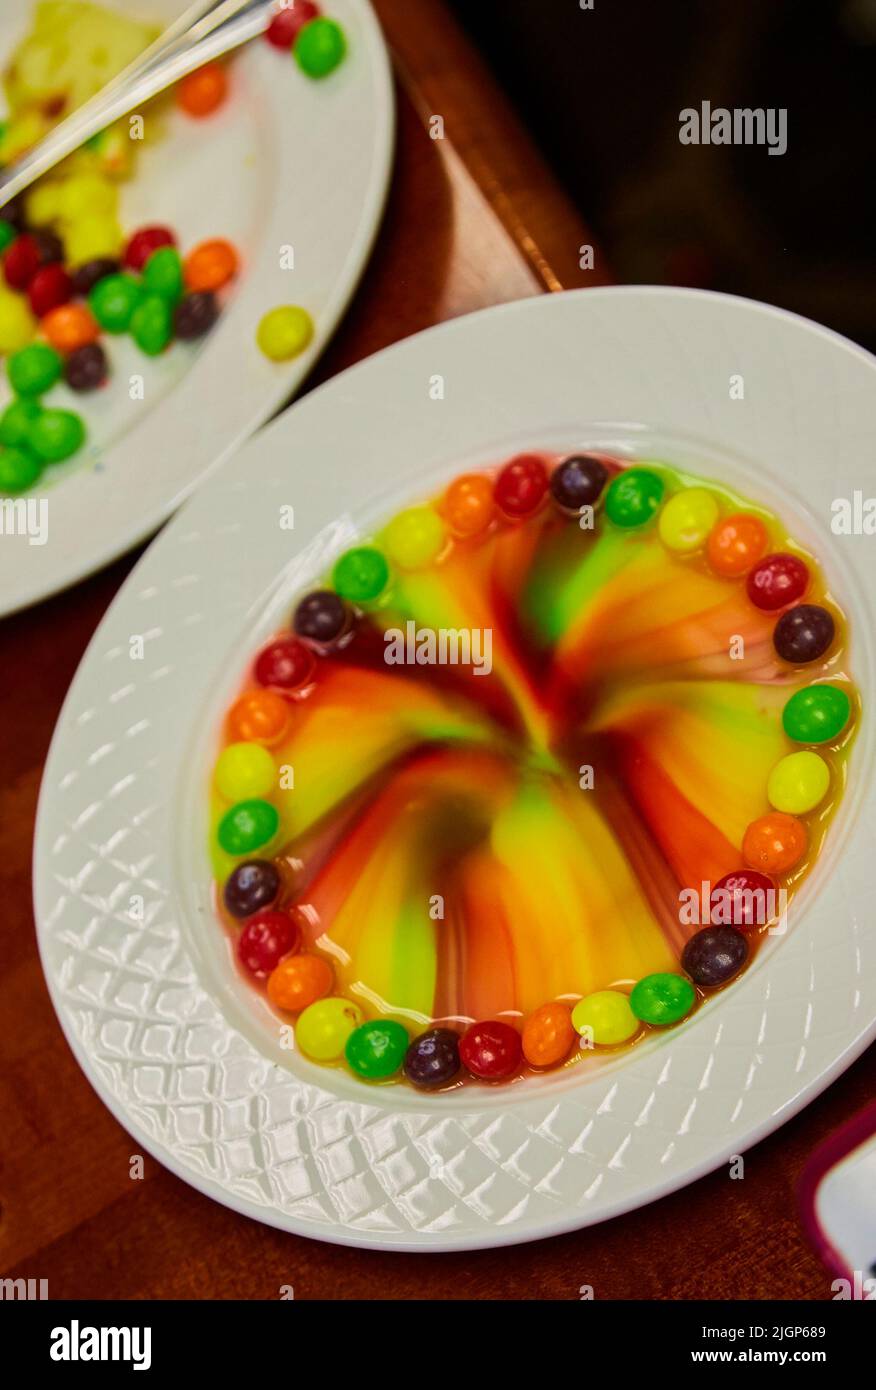 Skittles Rainbow made with water in plate at kids party.  Colors melt and merge into rainbow pattern. Stock Photo